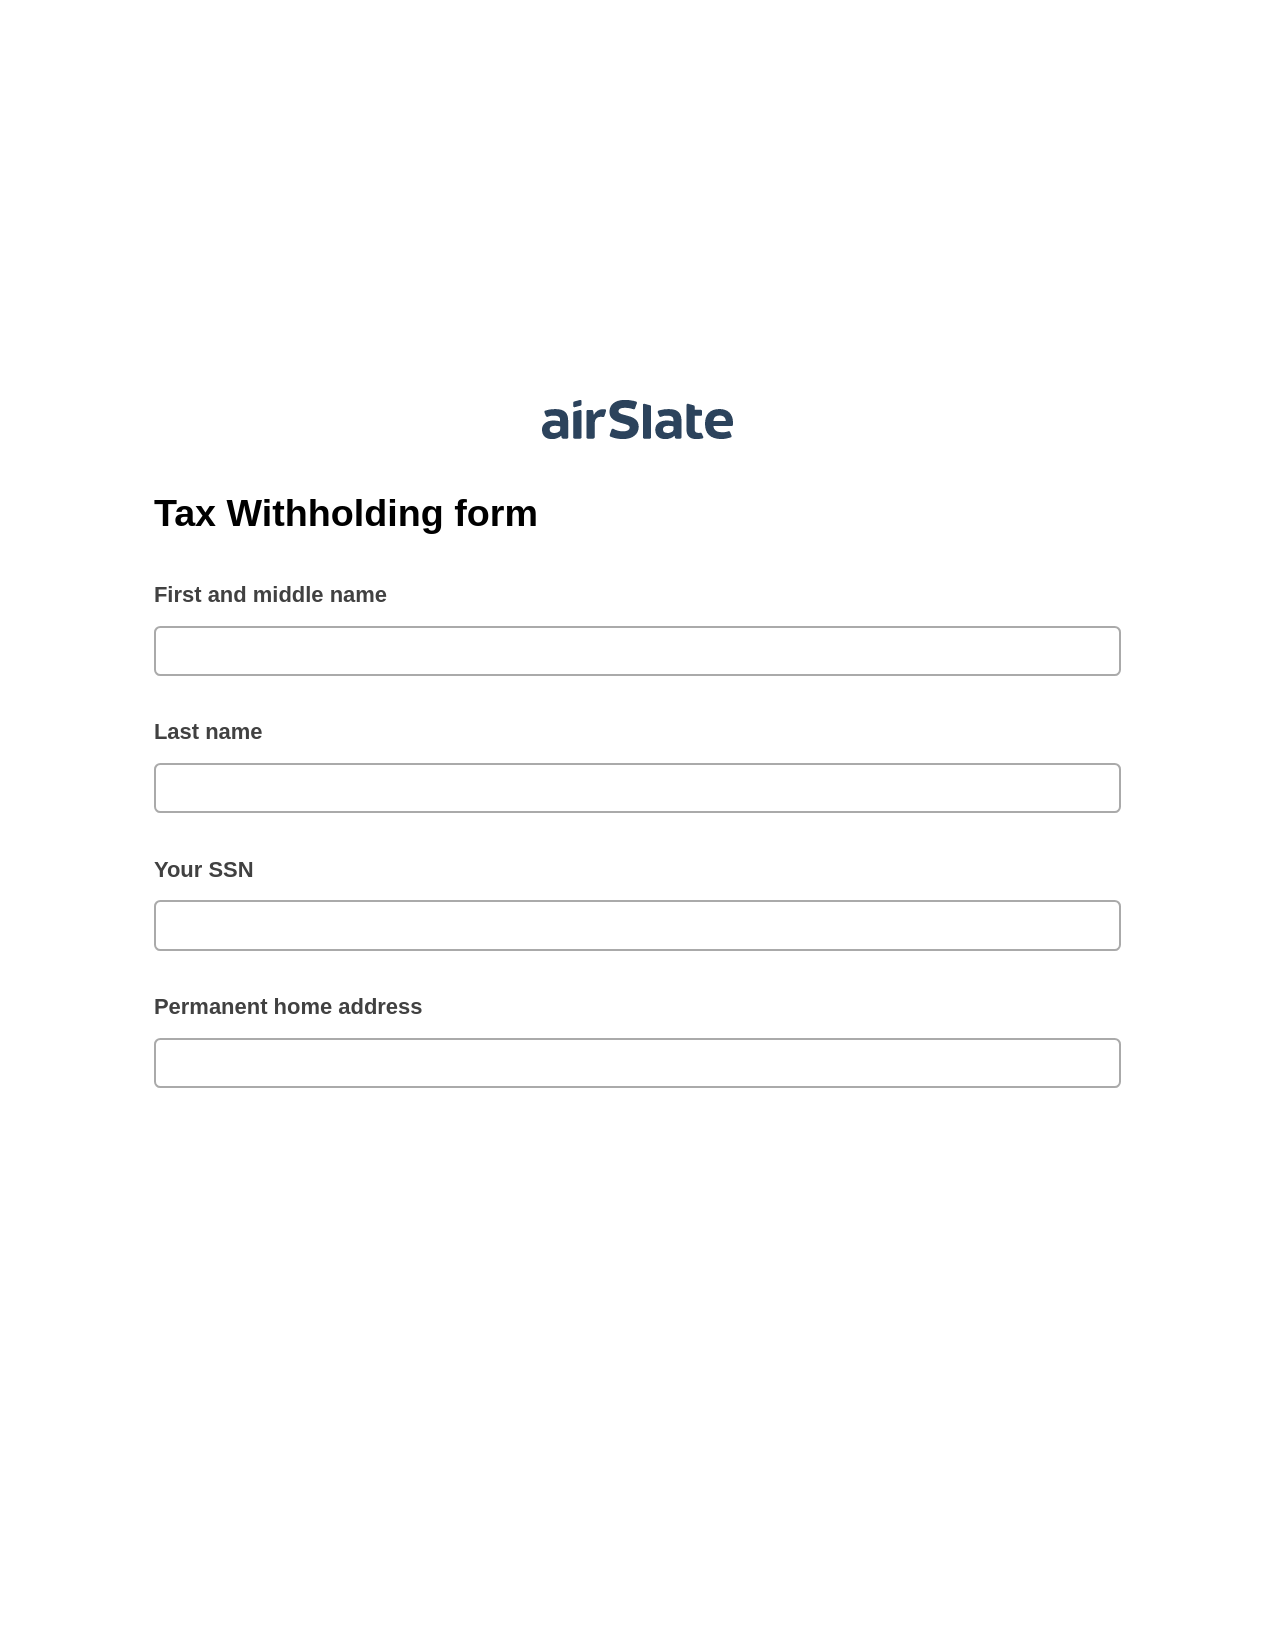 Multirole Tax Withholding form Pre-fill Slate from MS Dynamics 365 Records Bot, Mailchimp Add Recipient to Audience Bot, Archive to SharePoint Folder Bot